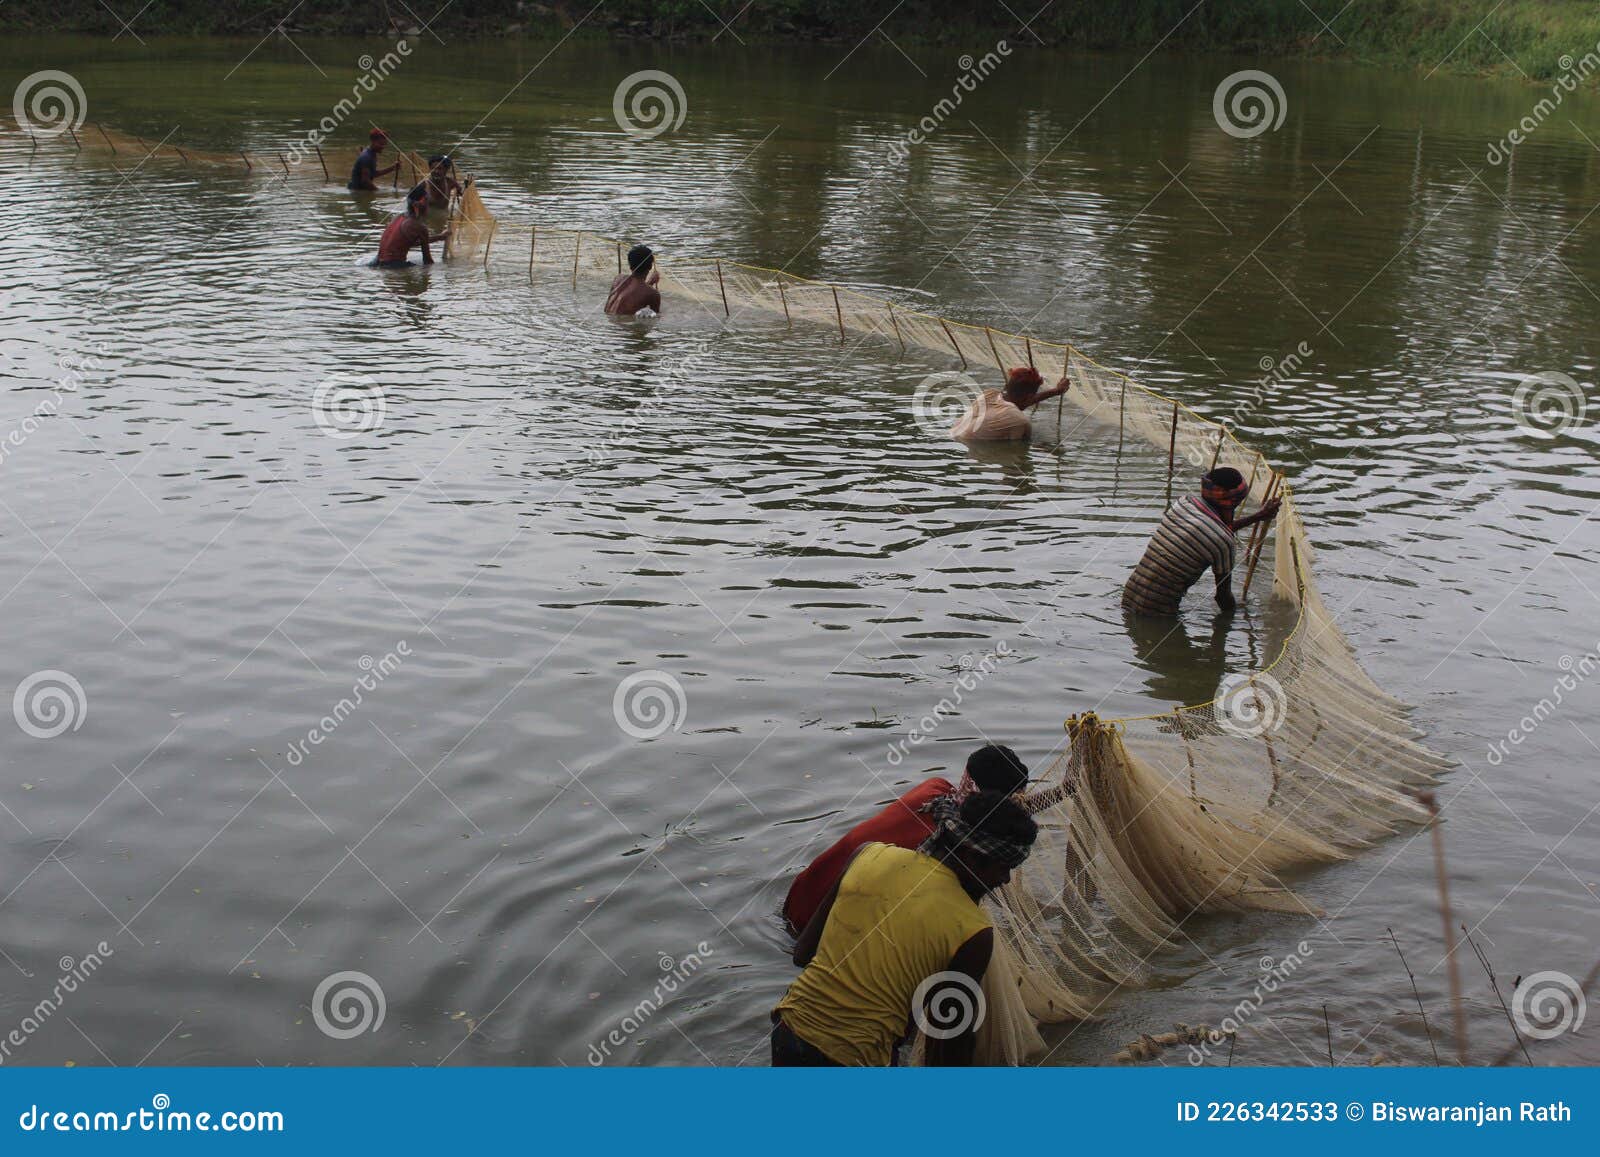 Drag Net Fishing in Asia Fishing in Pond Water Editorial Stock Photo -  Image of holding, freshwater: 226342533